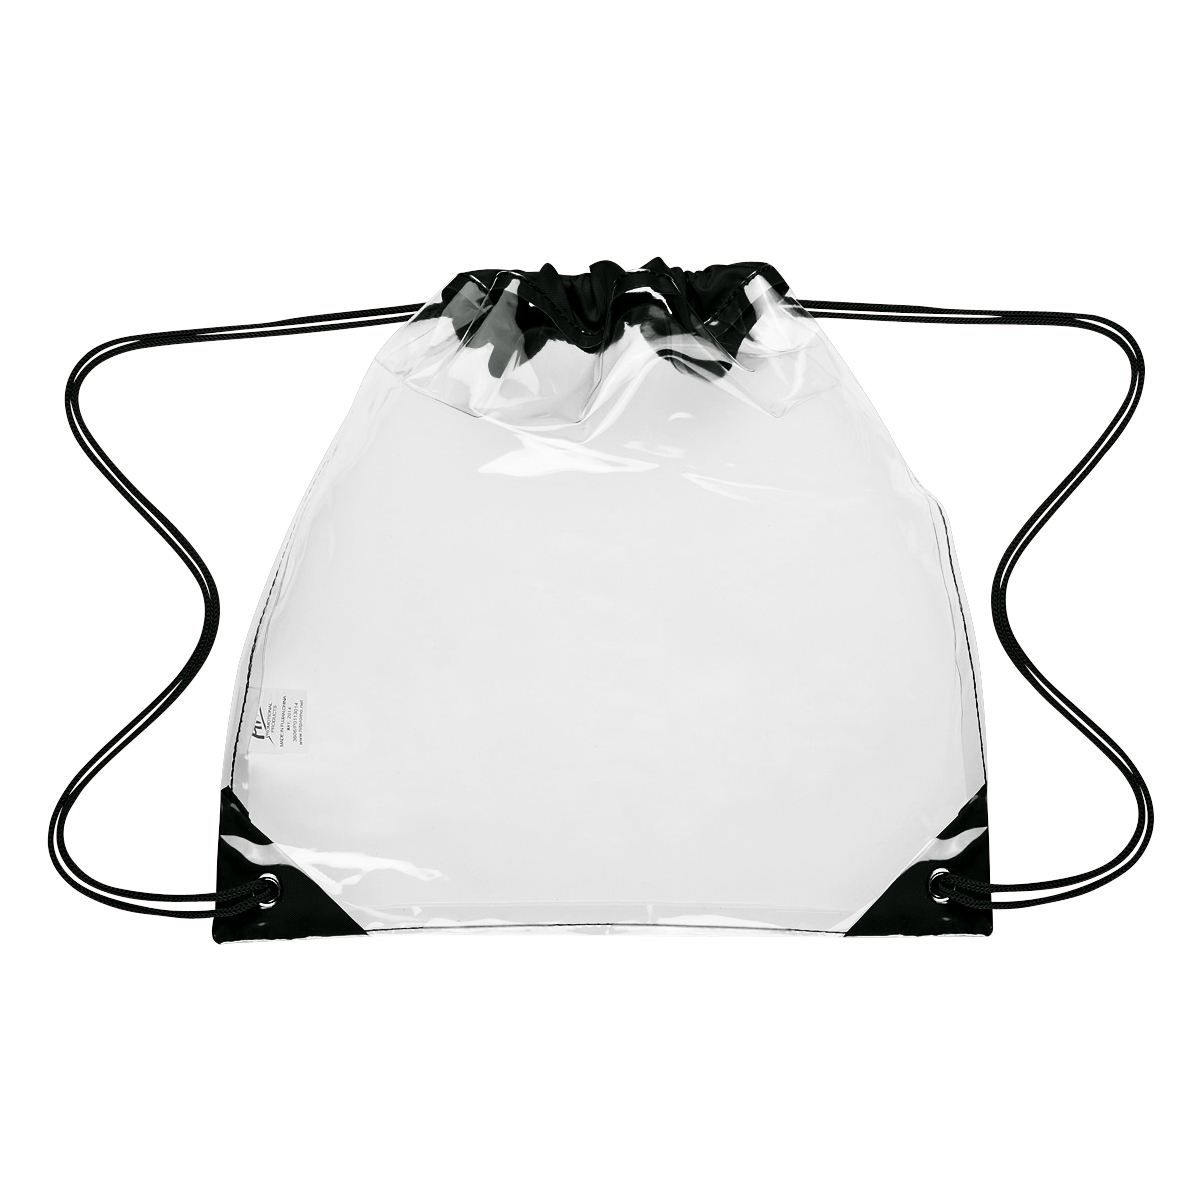 3606-touchdown-clear-drawstring-backpack-hit-promotional-products